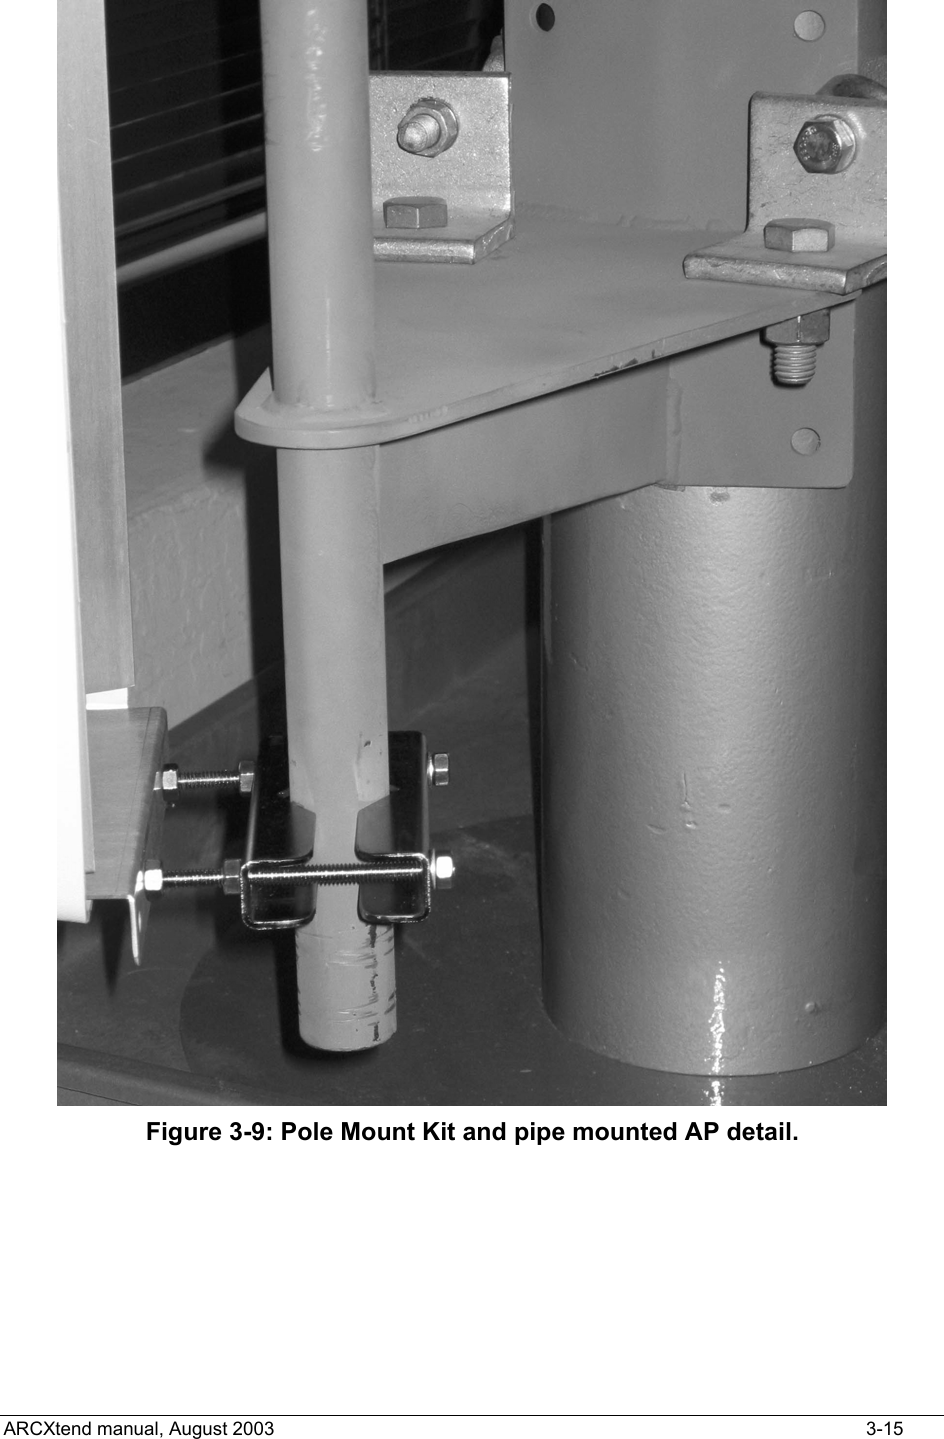   Figure 3-9: Pole Mount Kit and pipe mounted AP detail. ARCXtend manual, August 2003    3-15 